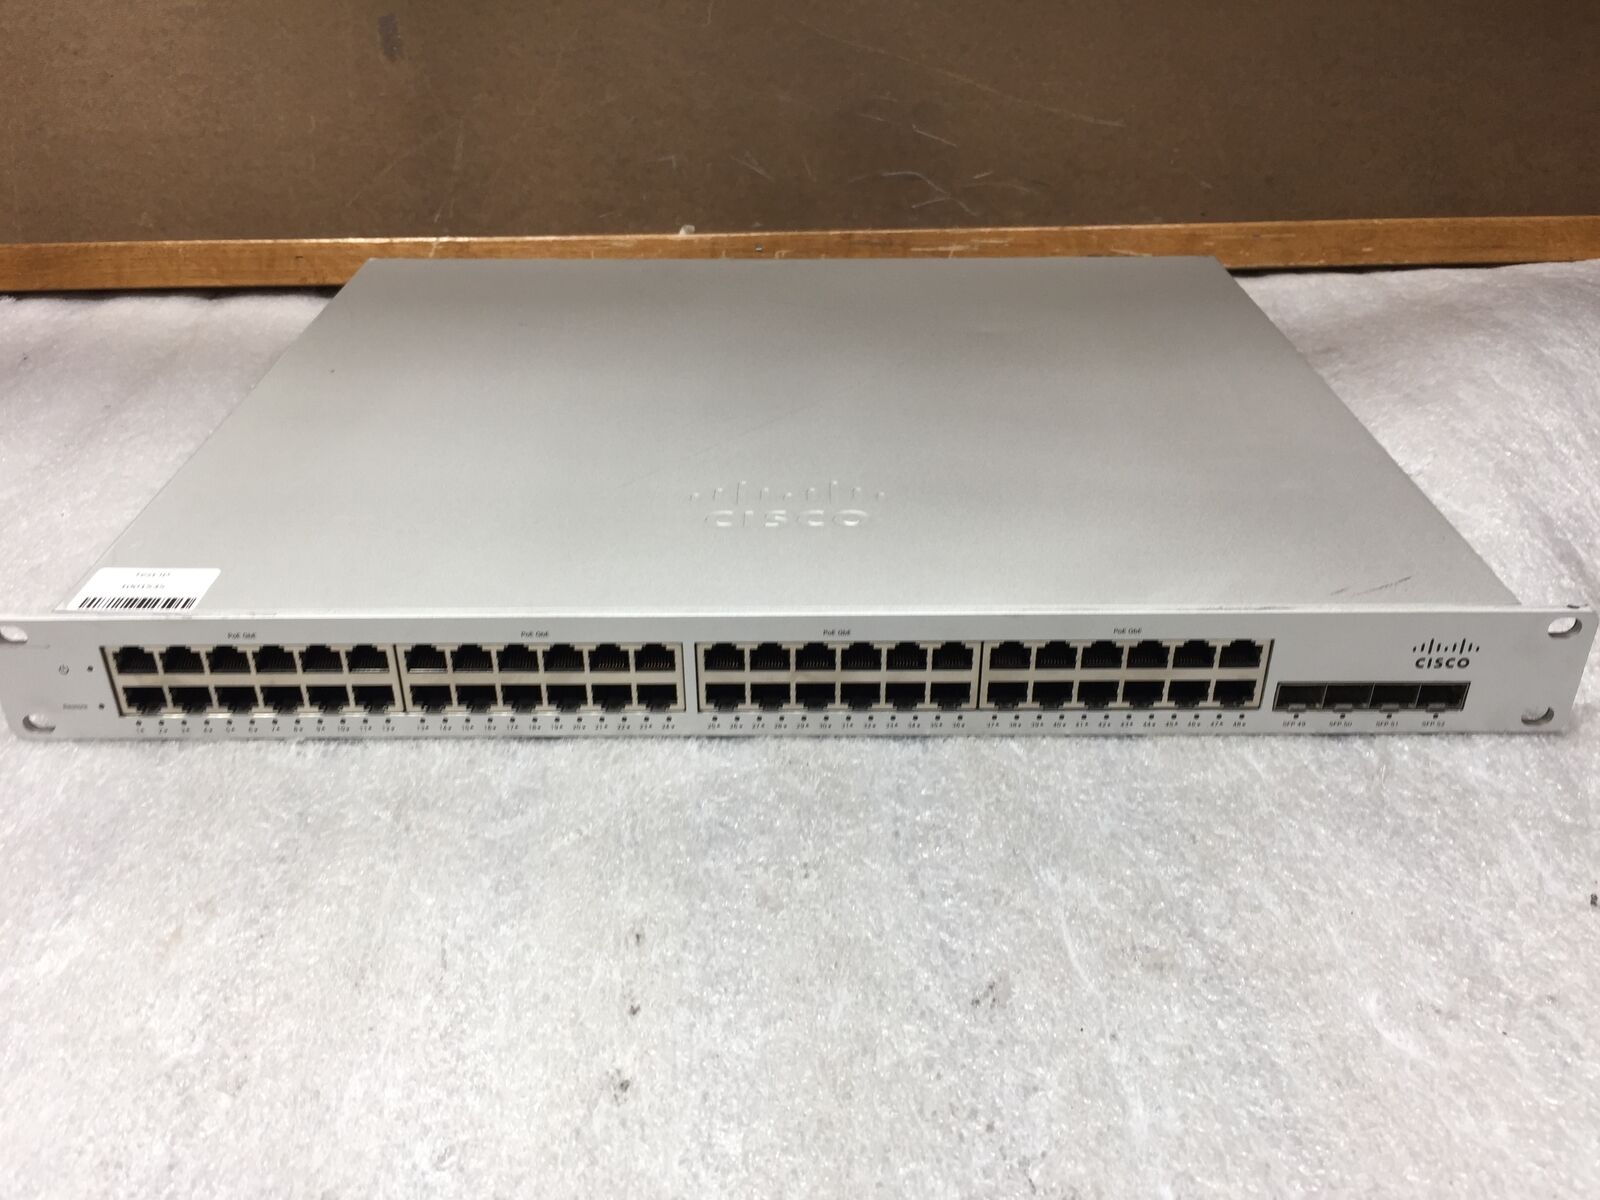 Cisco Meraki MS220-48LP-HW CLOUD MANAGED SWITCH, Tested/Working/Factory Reset